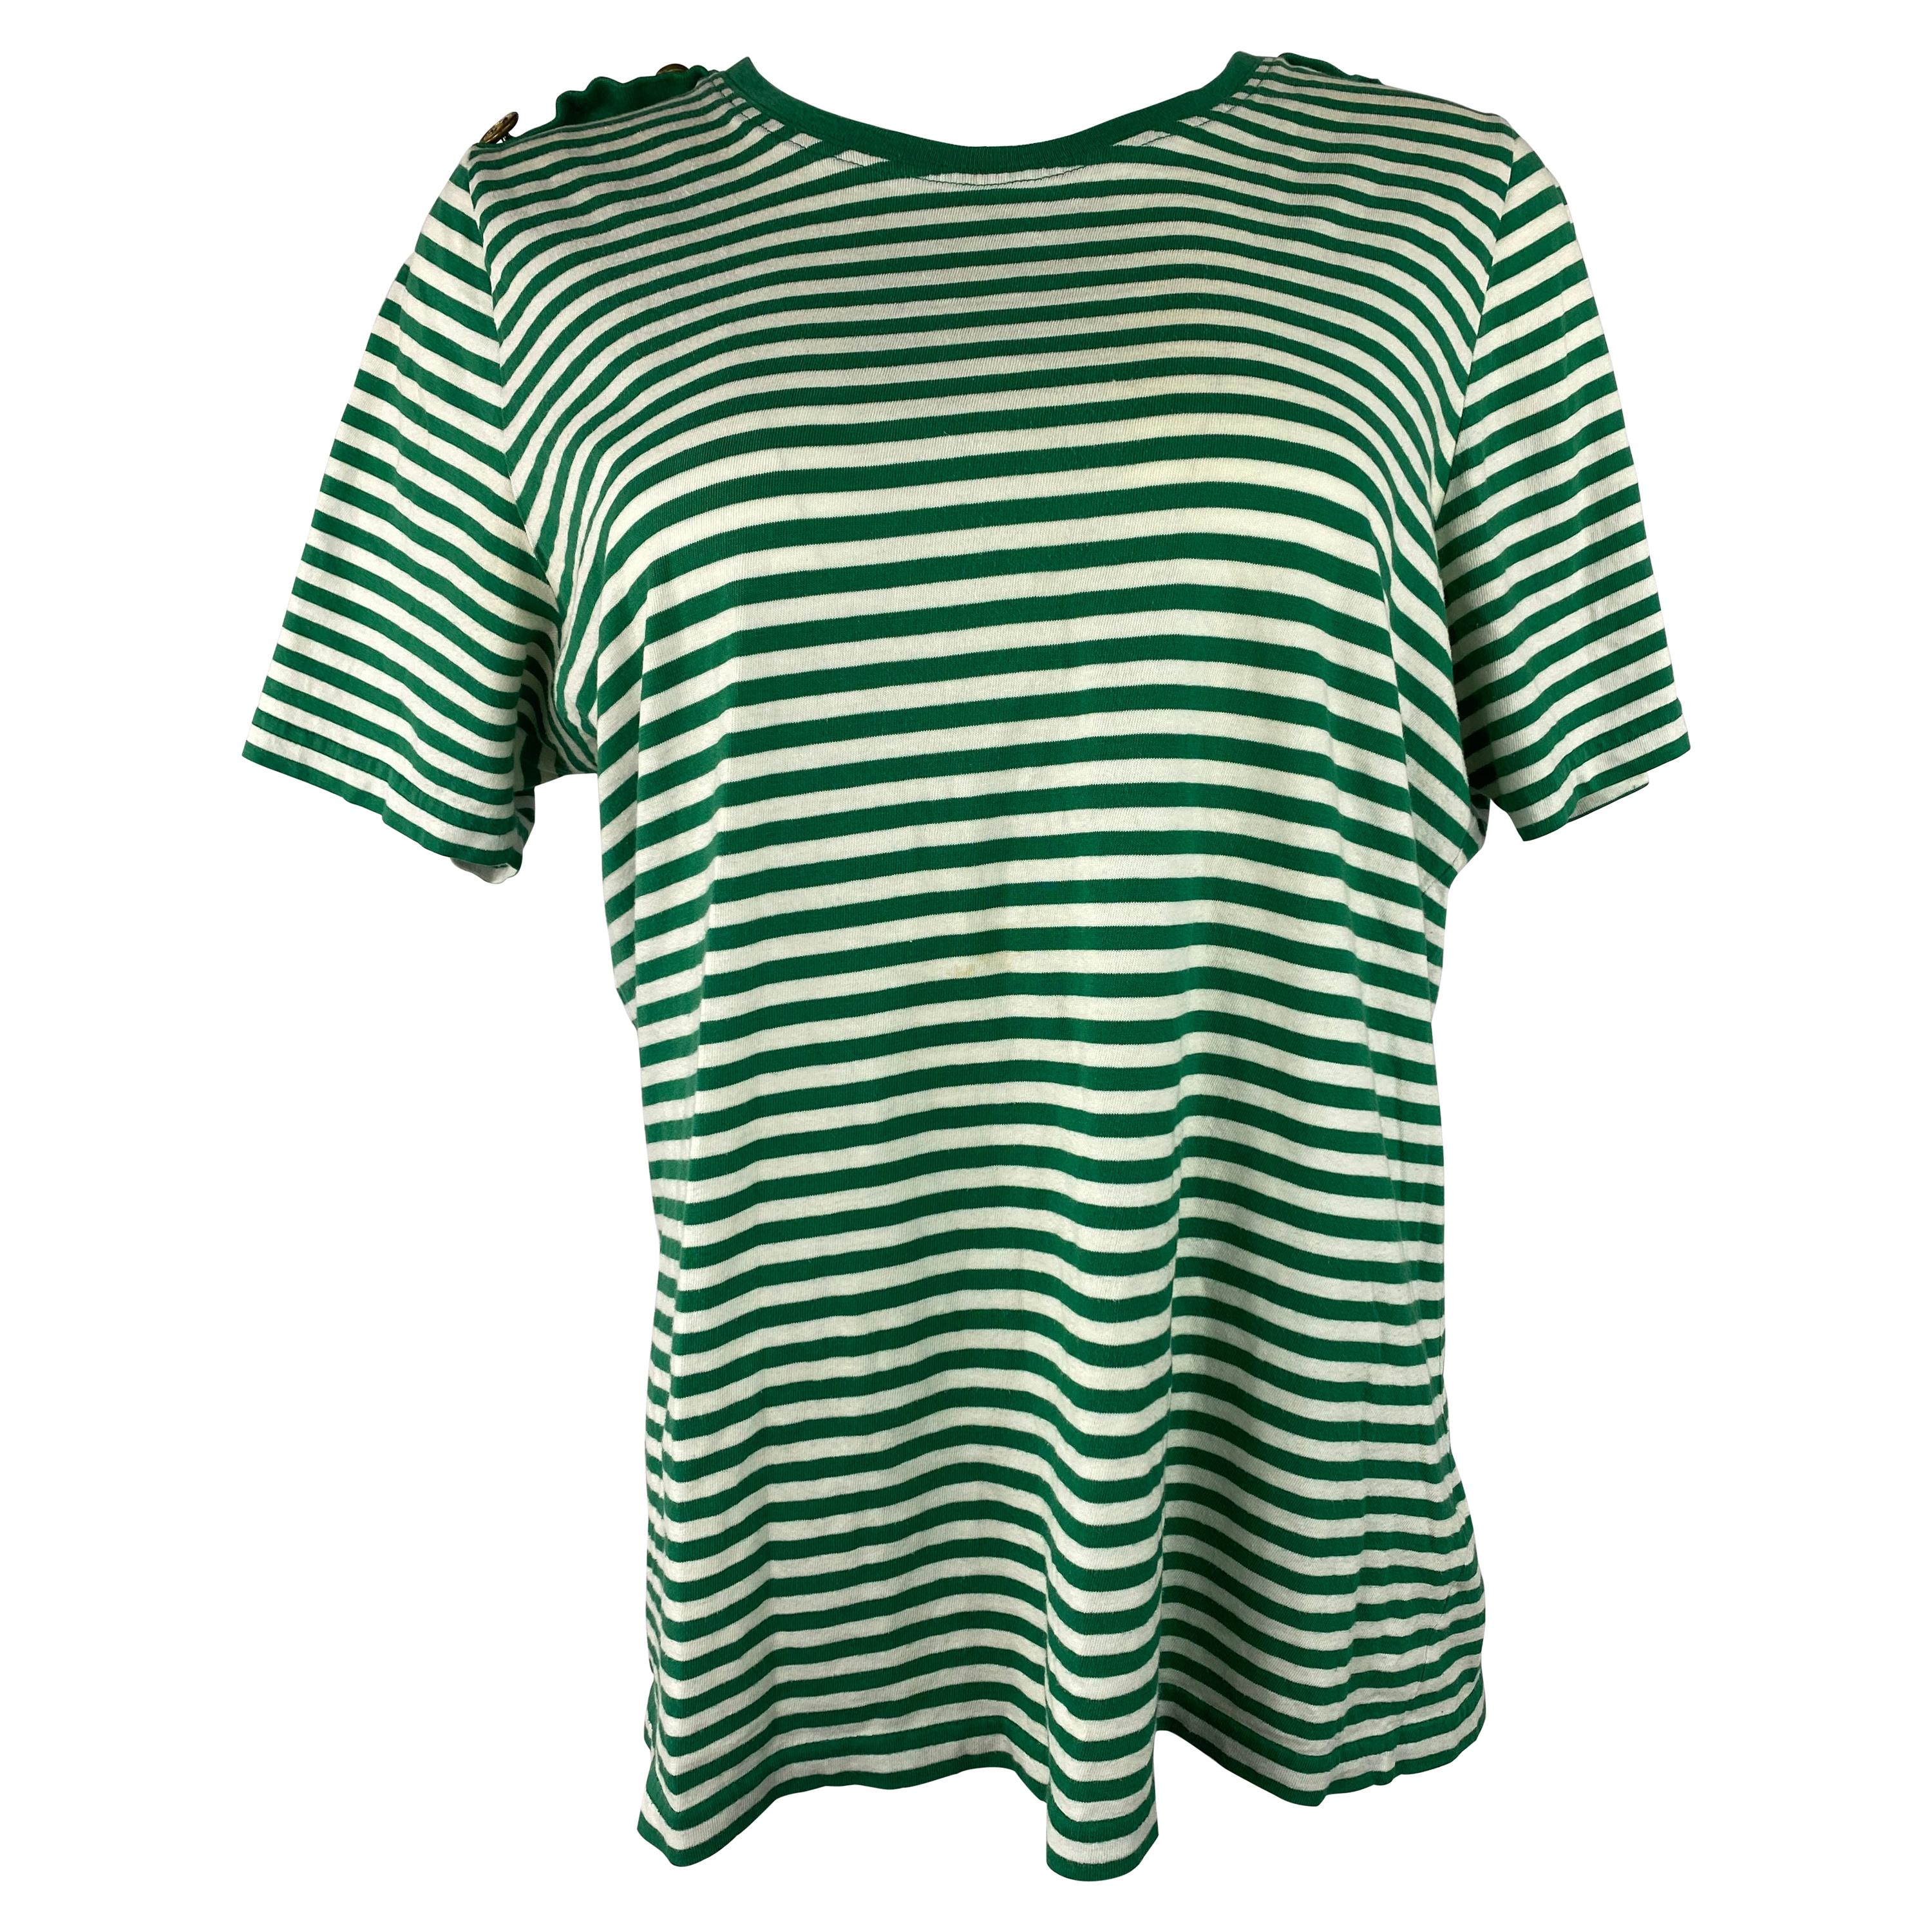 Royal Mer Bretange White and Green Striped T- Shirt, Size 46 For Sale